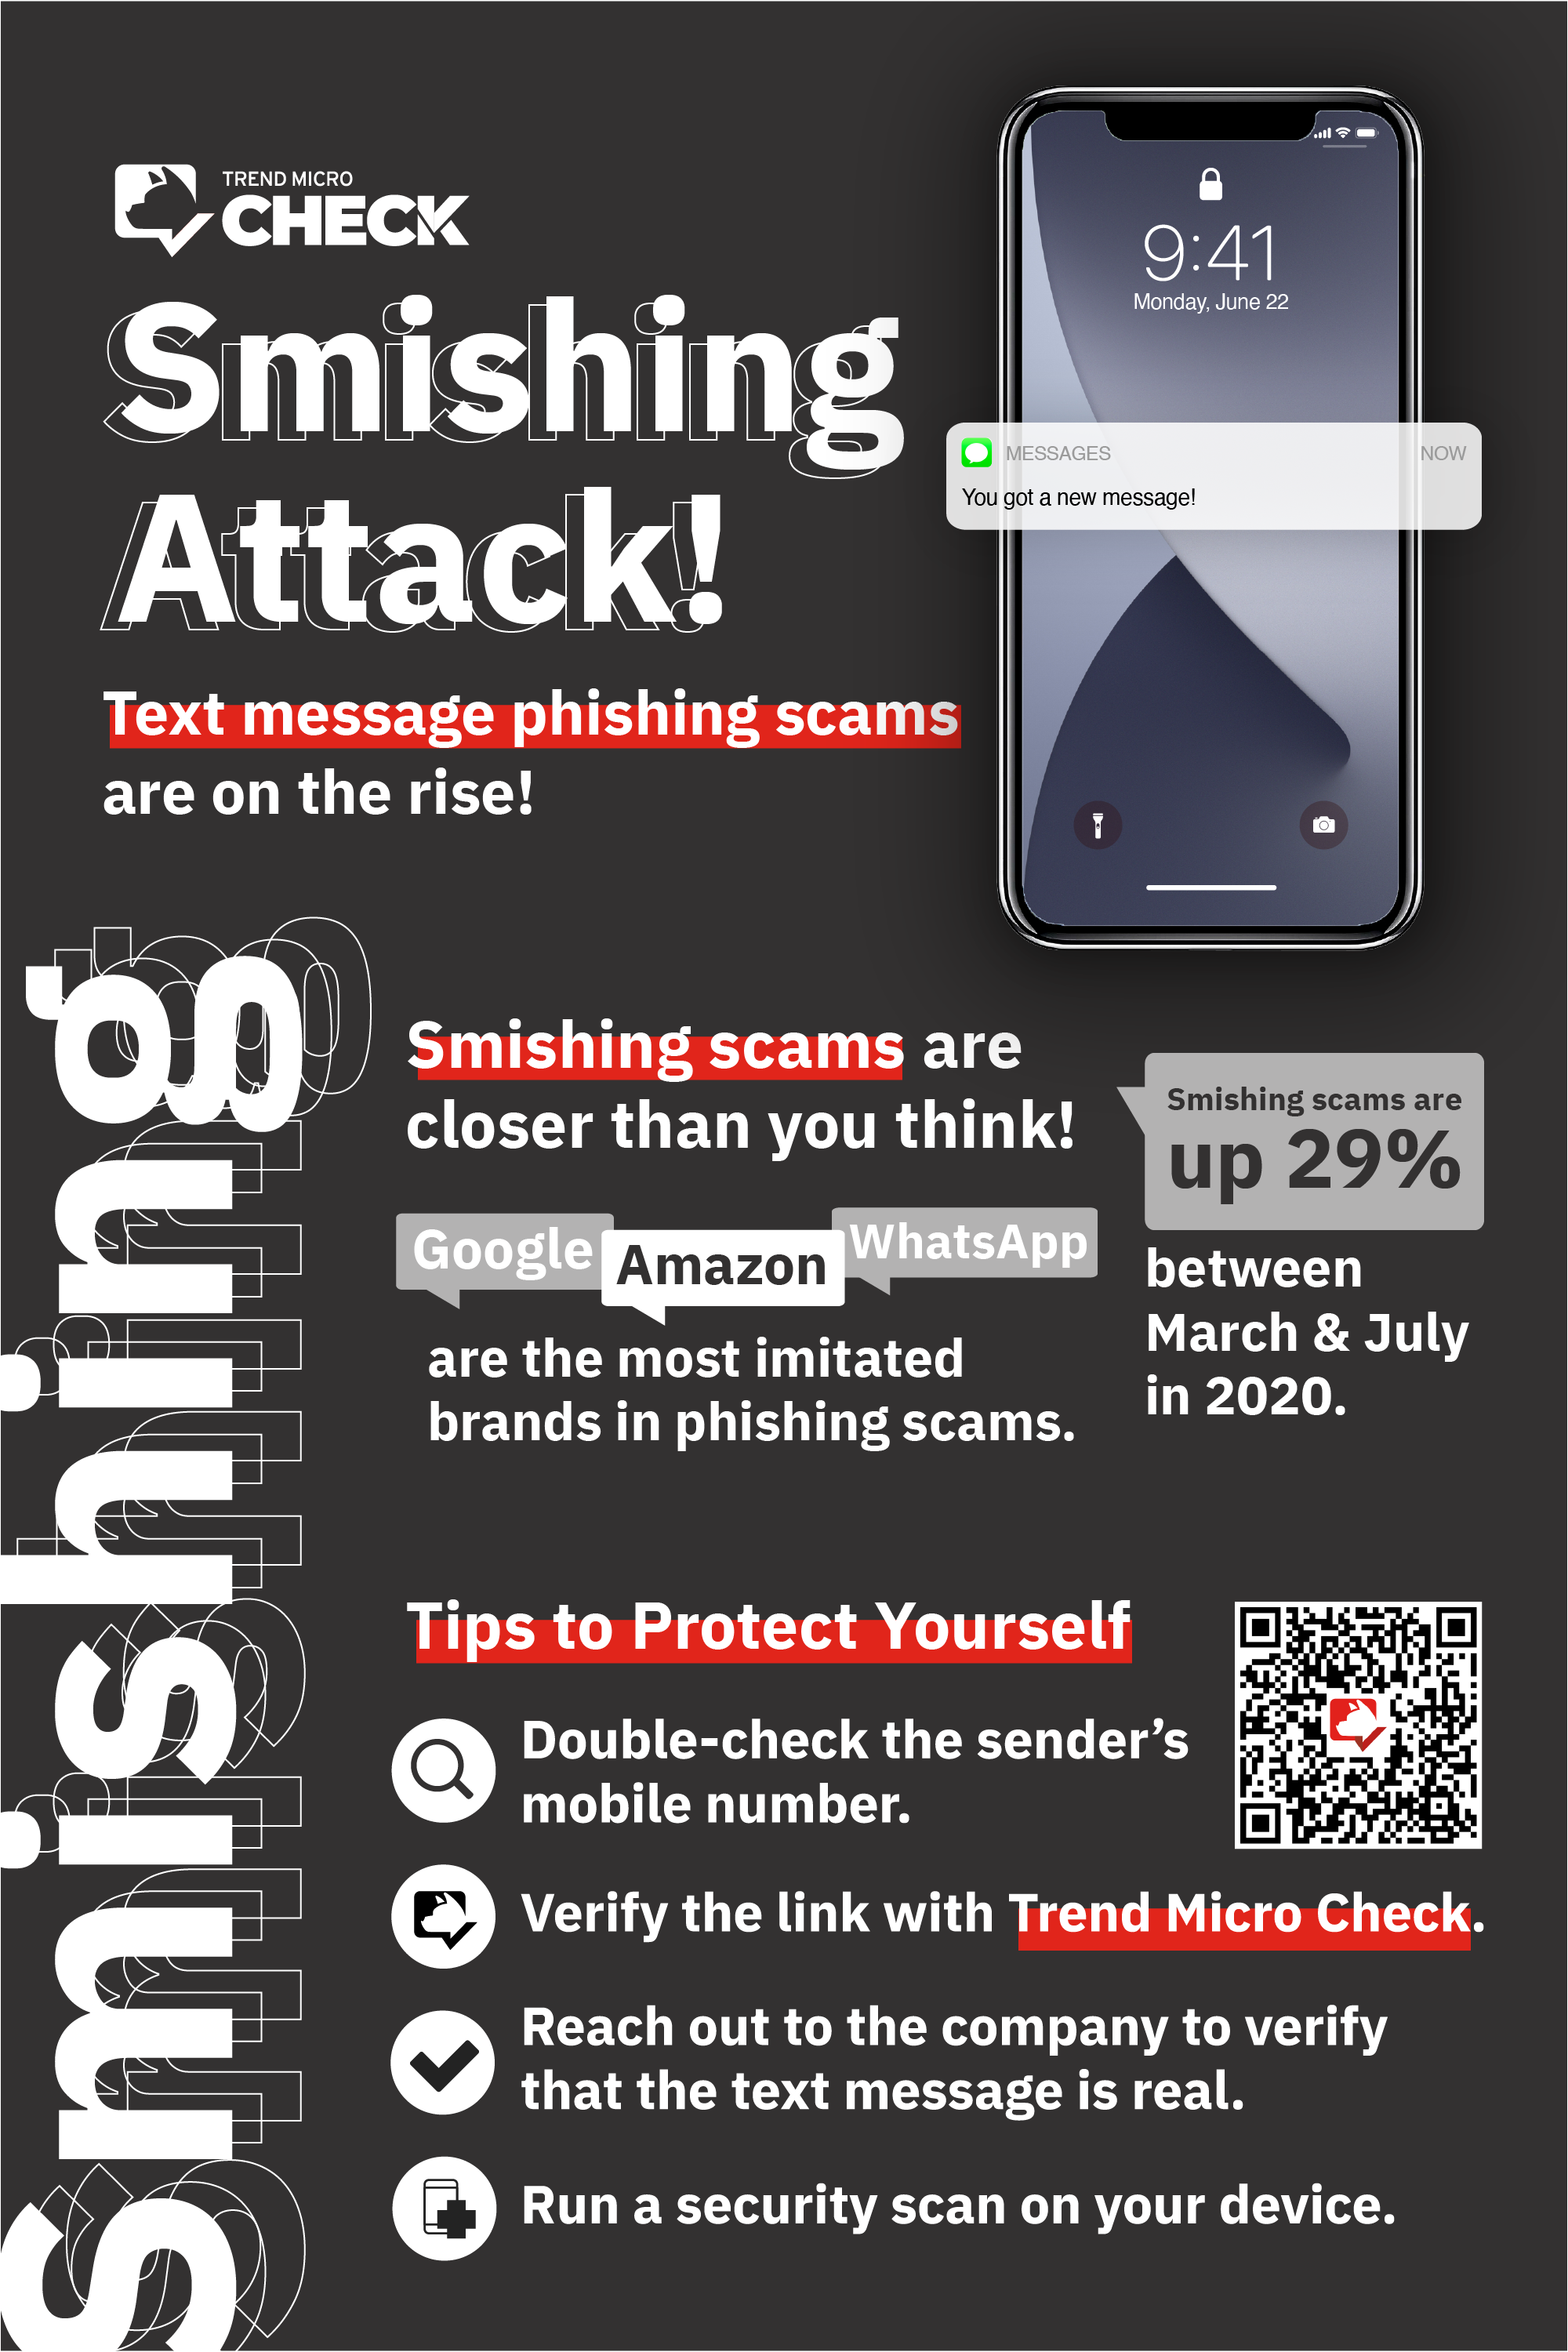 Text messages phishing scams are on the rise. 